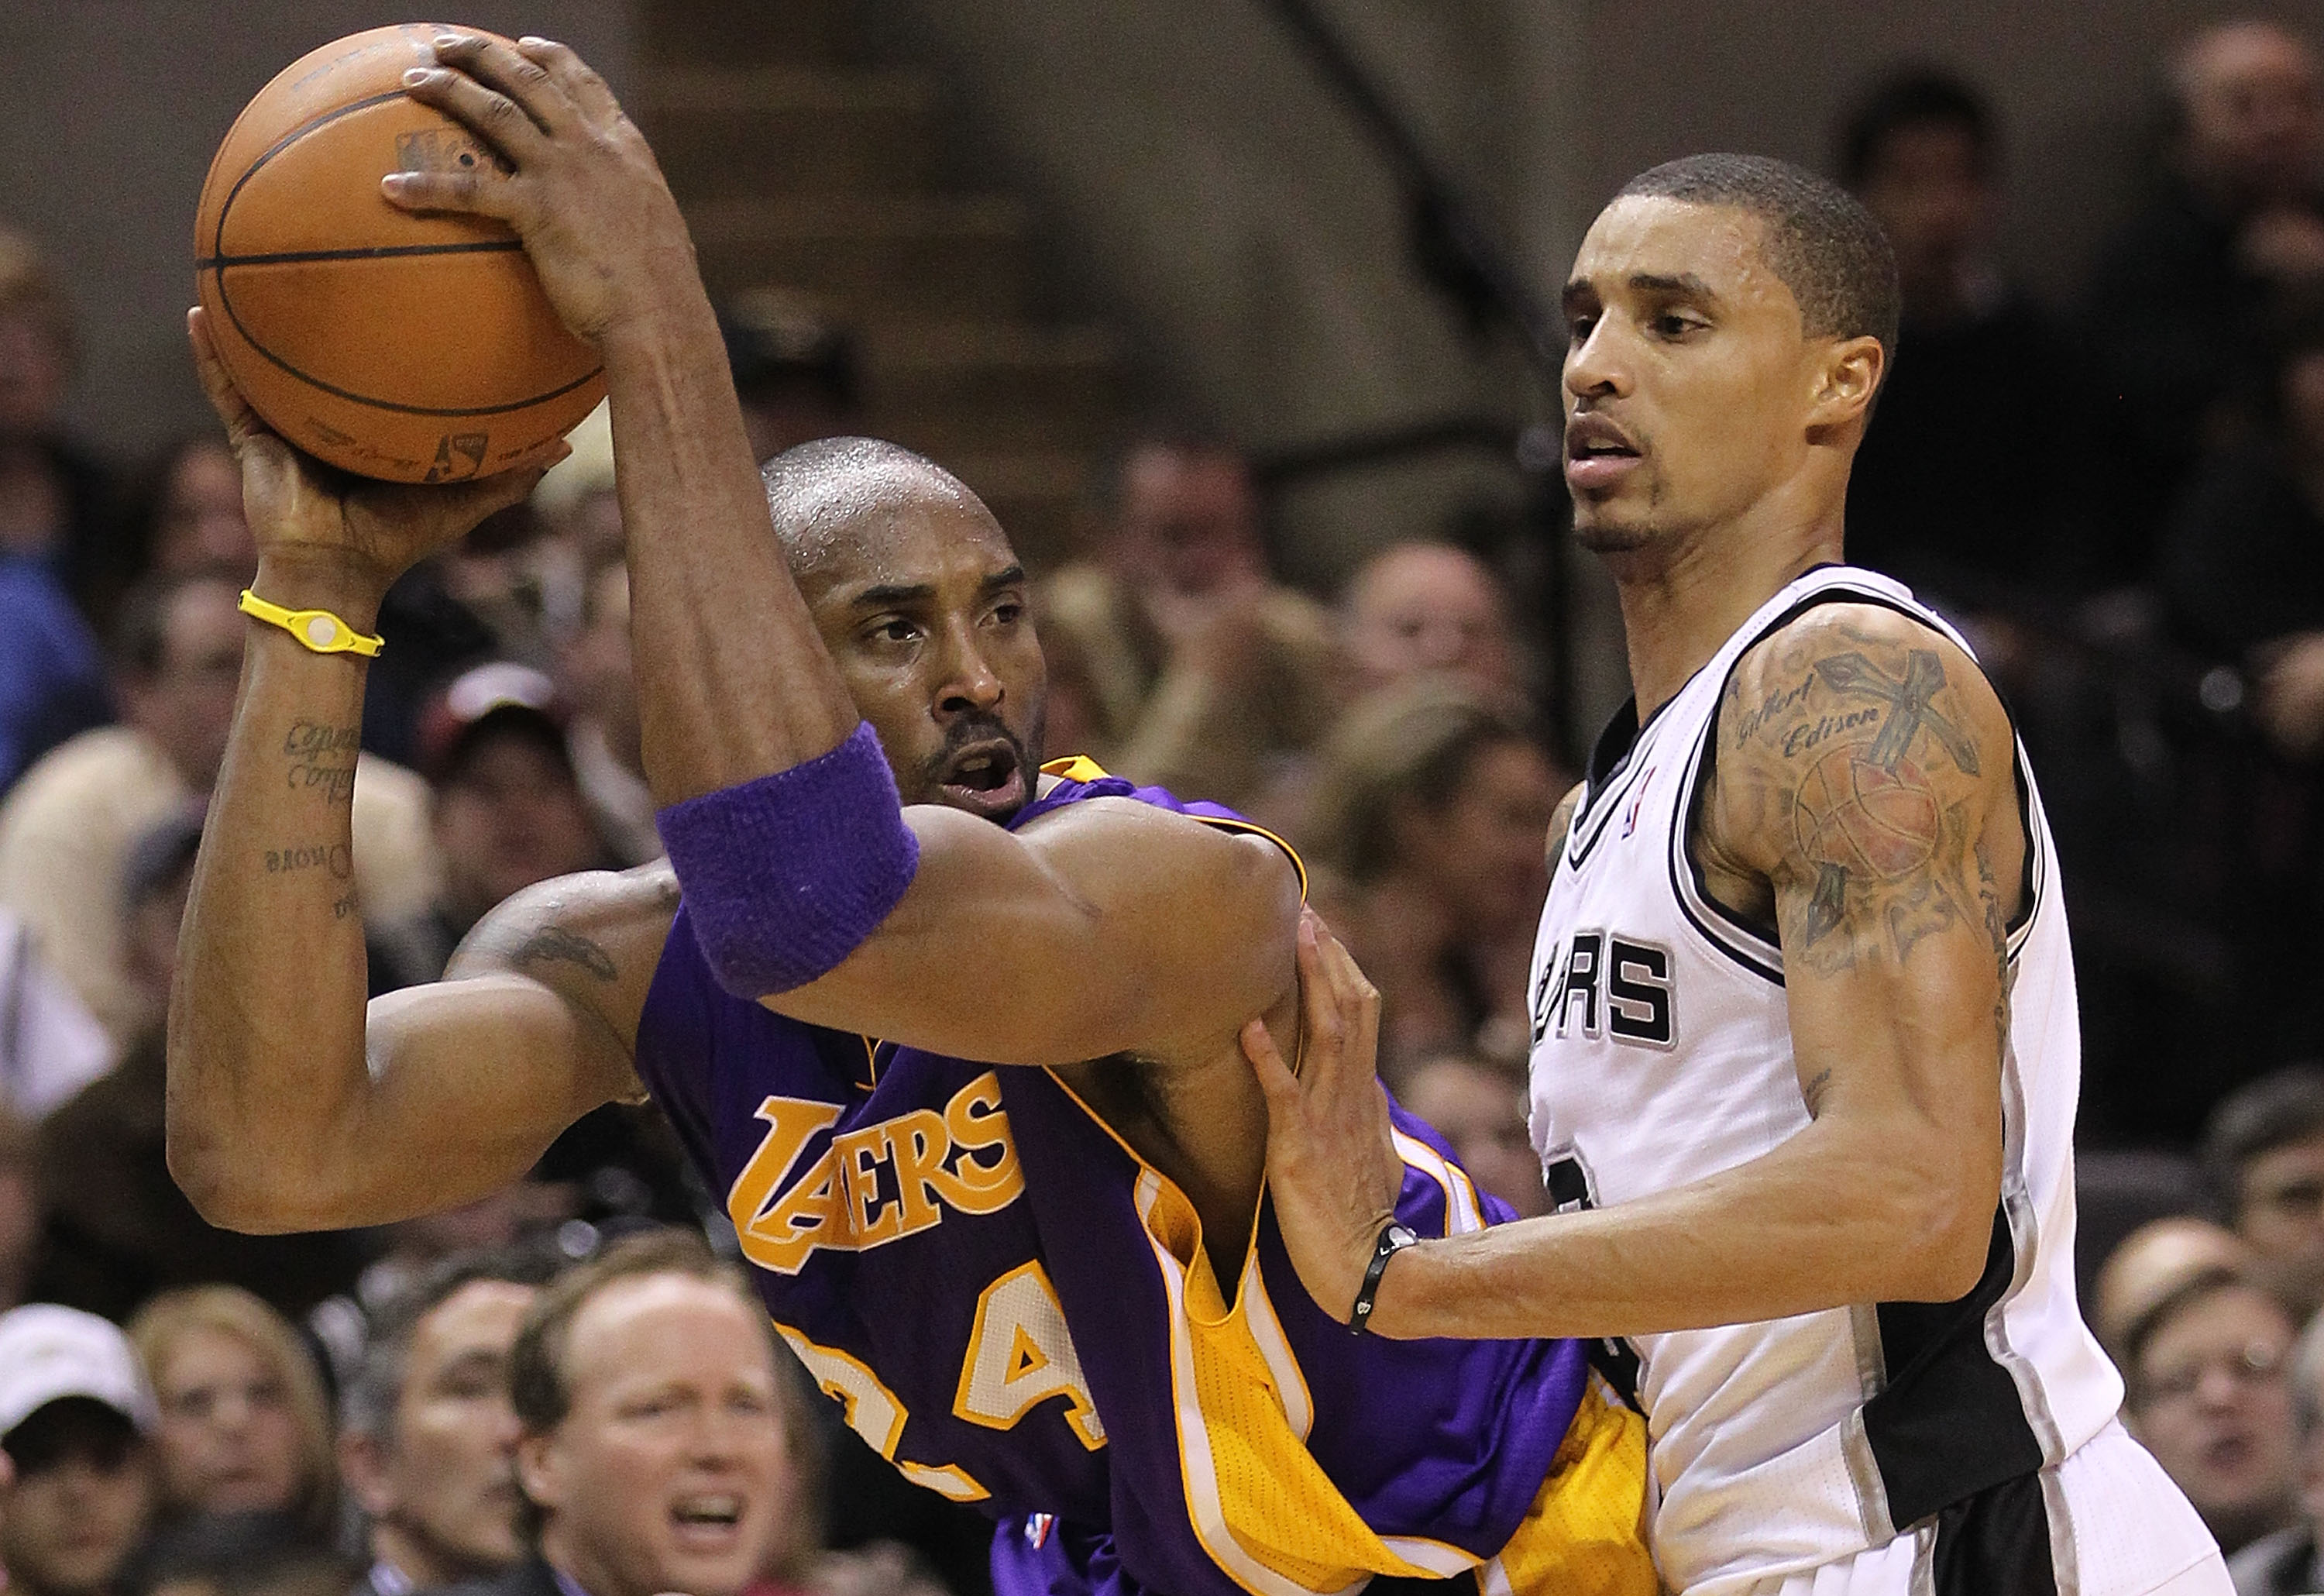 SAN ANTONIO, TX - DECEMBER 28:  Guard Kobe Bryant #24 of the Los Angeles Lakers dribbles the ball against George Hill #3 of the San Antonio Spurs at AT&T Center on December 28, 2010 in San Antonio, Texas.  NOTE TO USER: User expressly acknowledges and agr